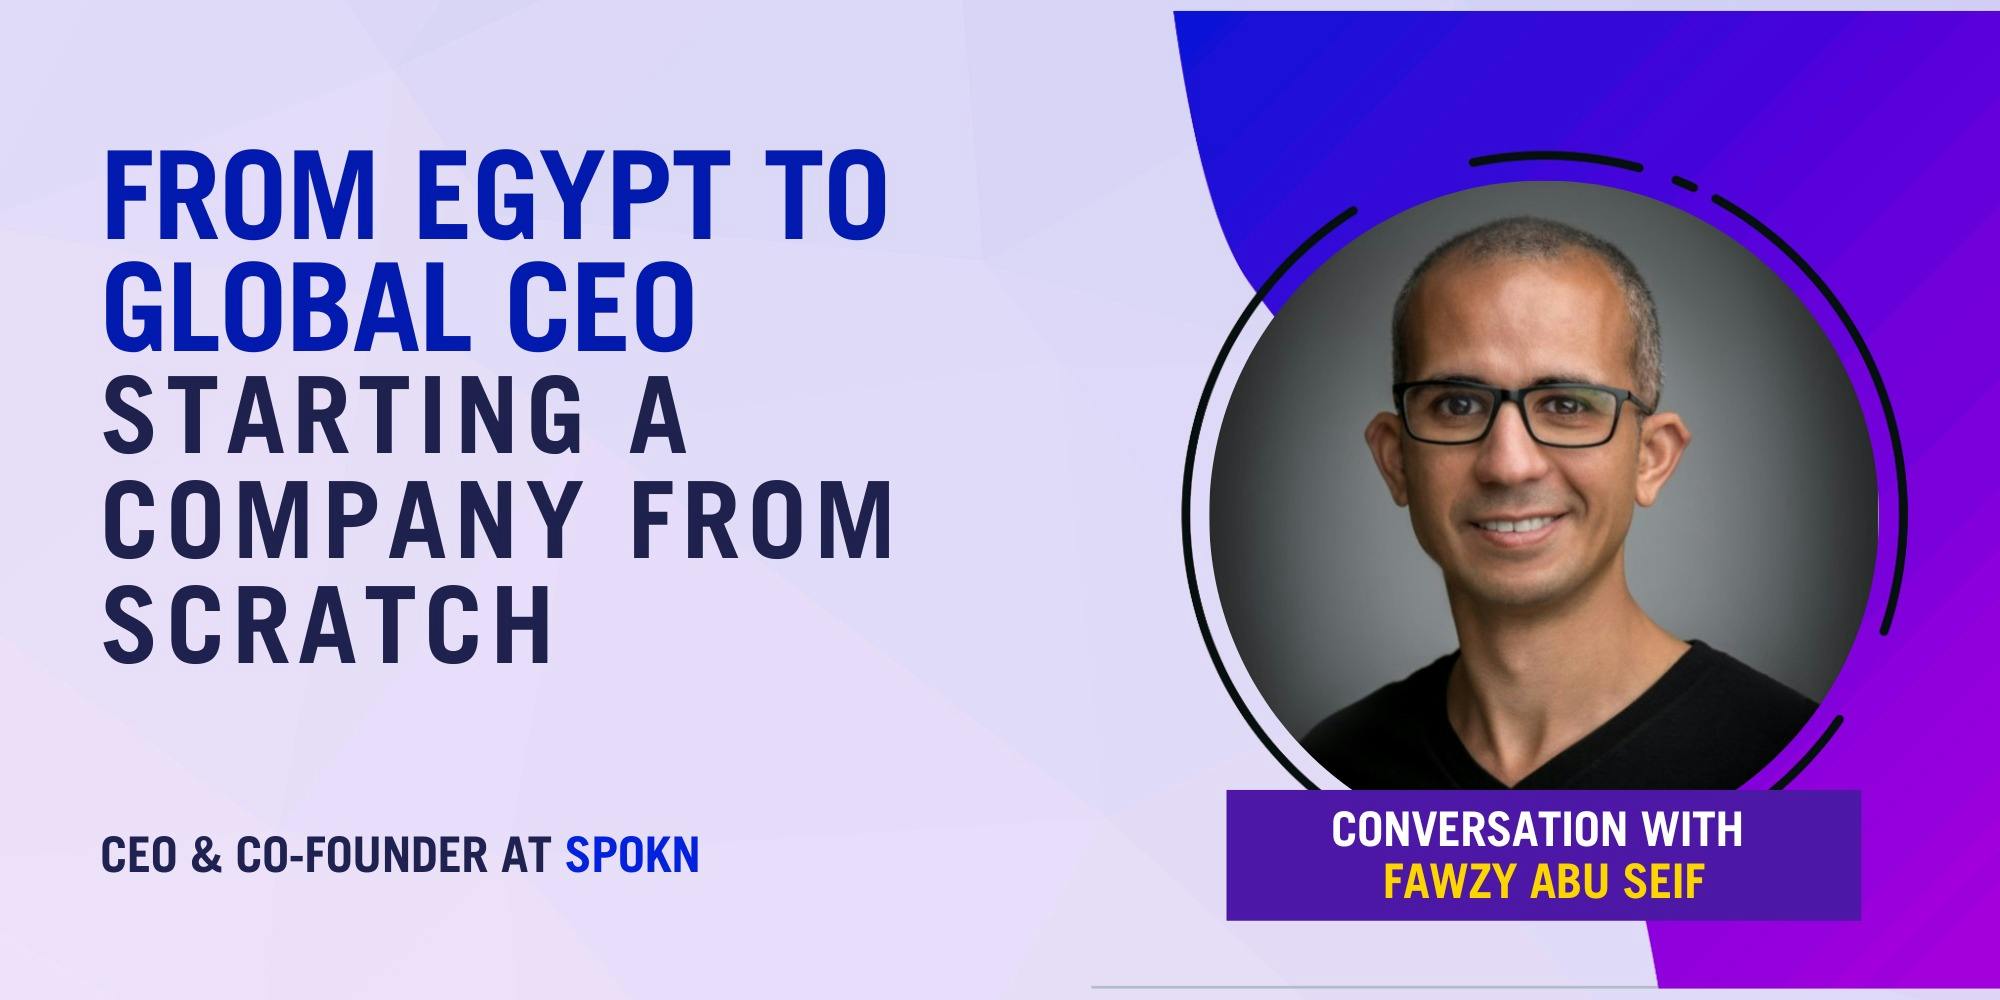 From Egypt to Global CEO - Starting a Company From Scratch